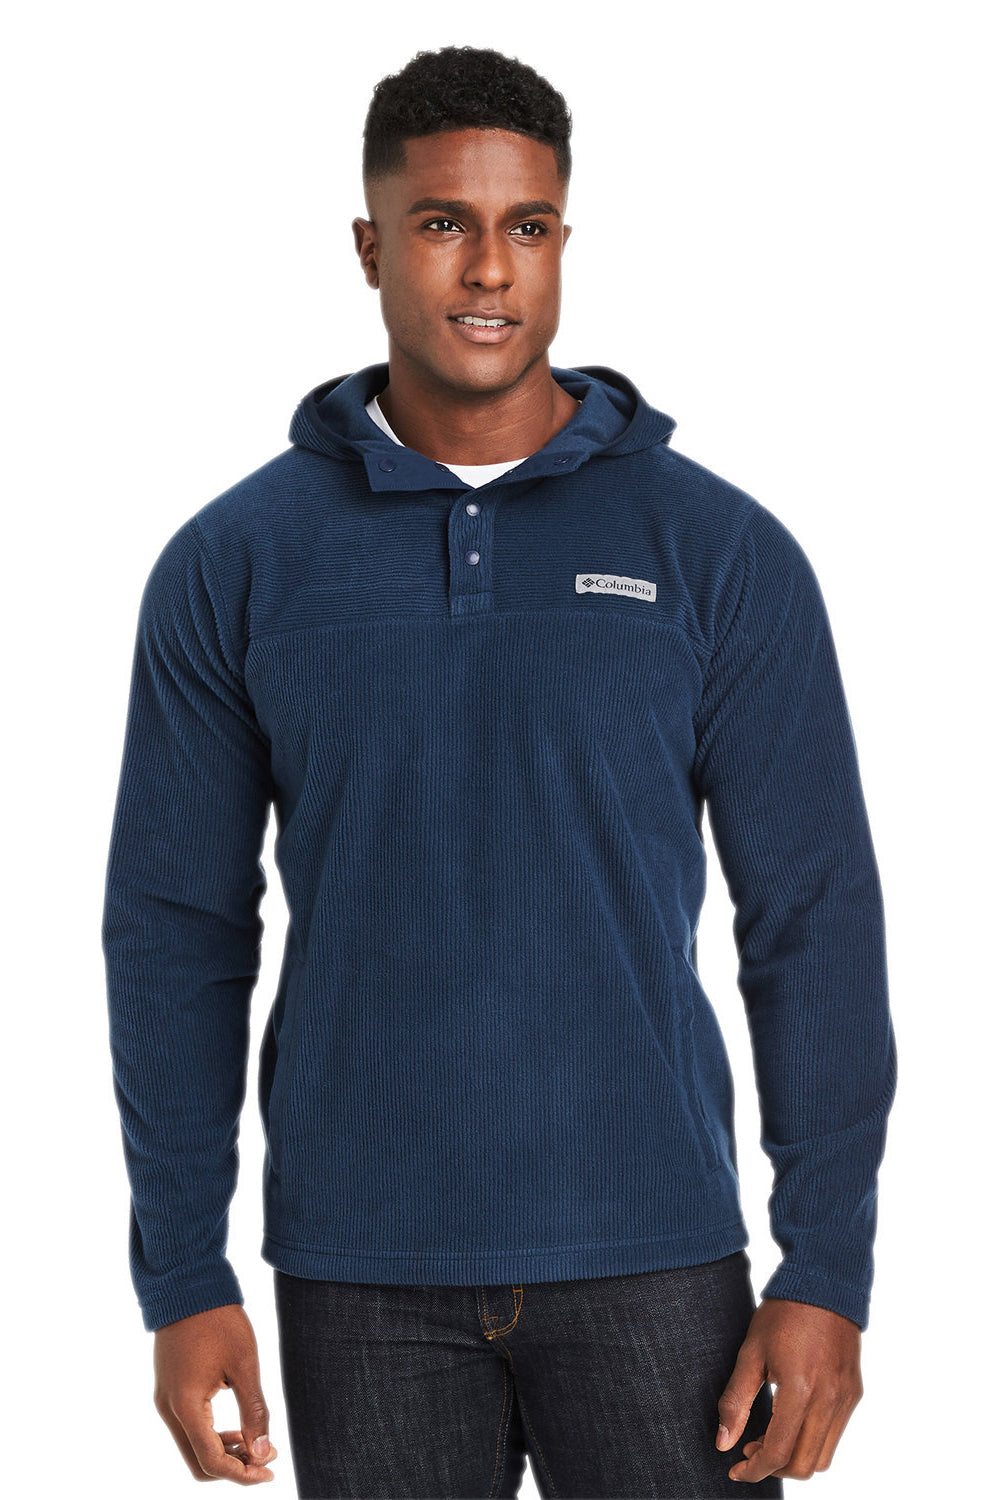 Columbia 1954251 Mens Steens Mountain Novelty 1/4 Snap Hooded Jacket Collegiate Navy Blue Front